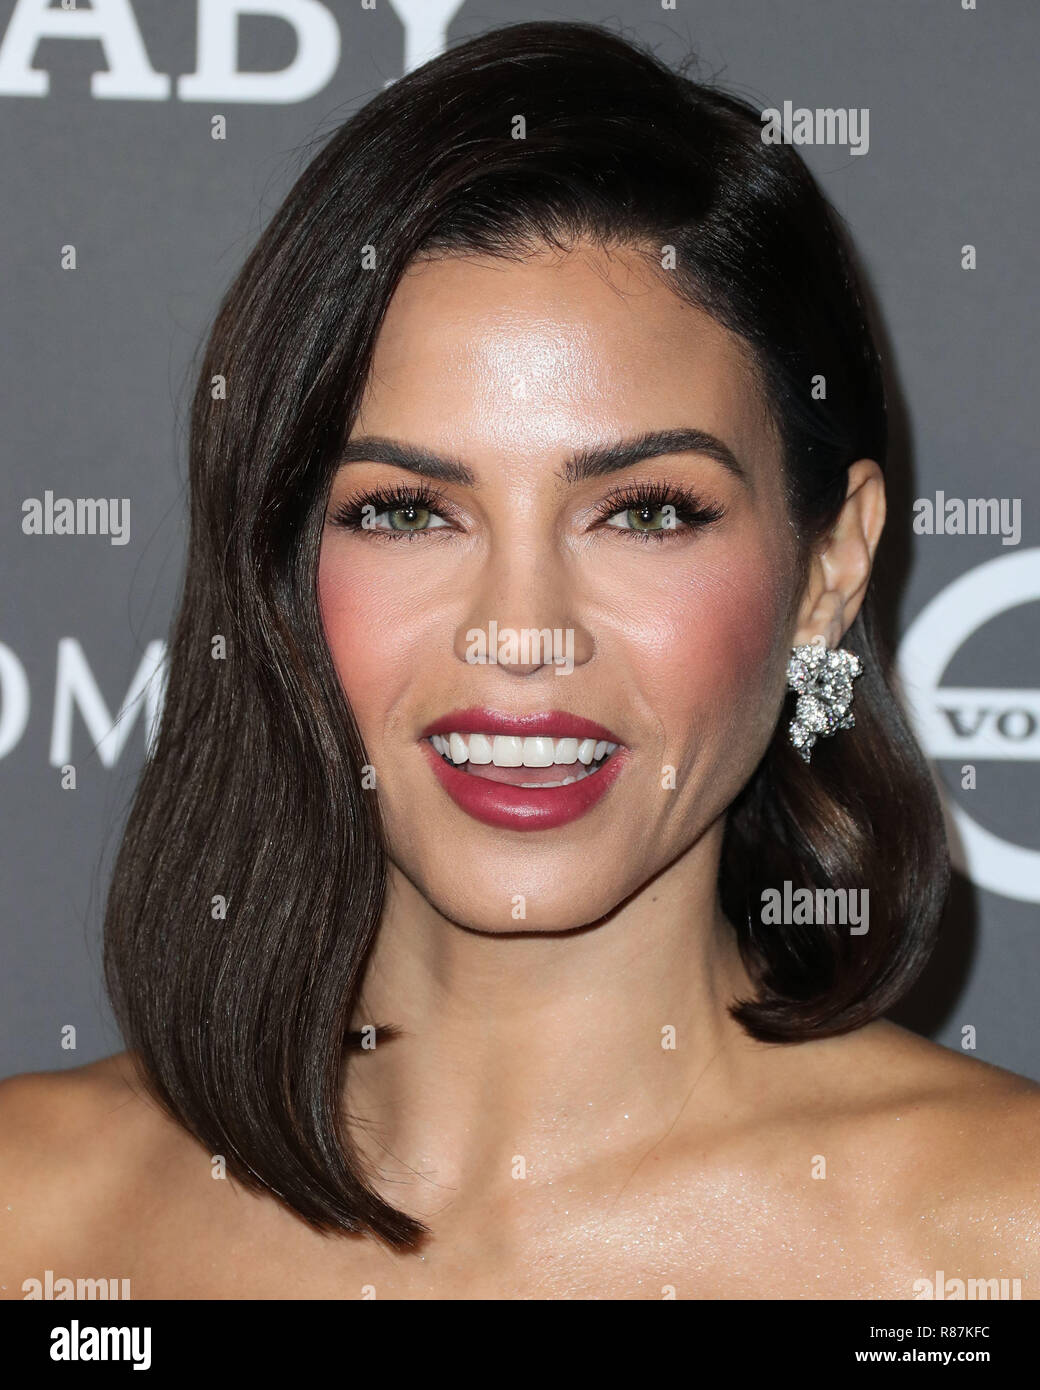 CULVER CITY, LOS ANGELES, CA, USA - NOVEMBER 10: Actress Jenna Dewan wearing a Reem Acra bustier and pants, Sophia Webster shoes, Anabela Chan earrings, a Kallati ring, and an Yvan Tufenkjian bracelet arrives at the 2018 Baby2Baby Gala held at 3Labs on November 10, 2018 in Culver City, Los Angeles, California, United States. (Photo by Xavier Collin/Image Press Agency) Stock Photo